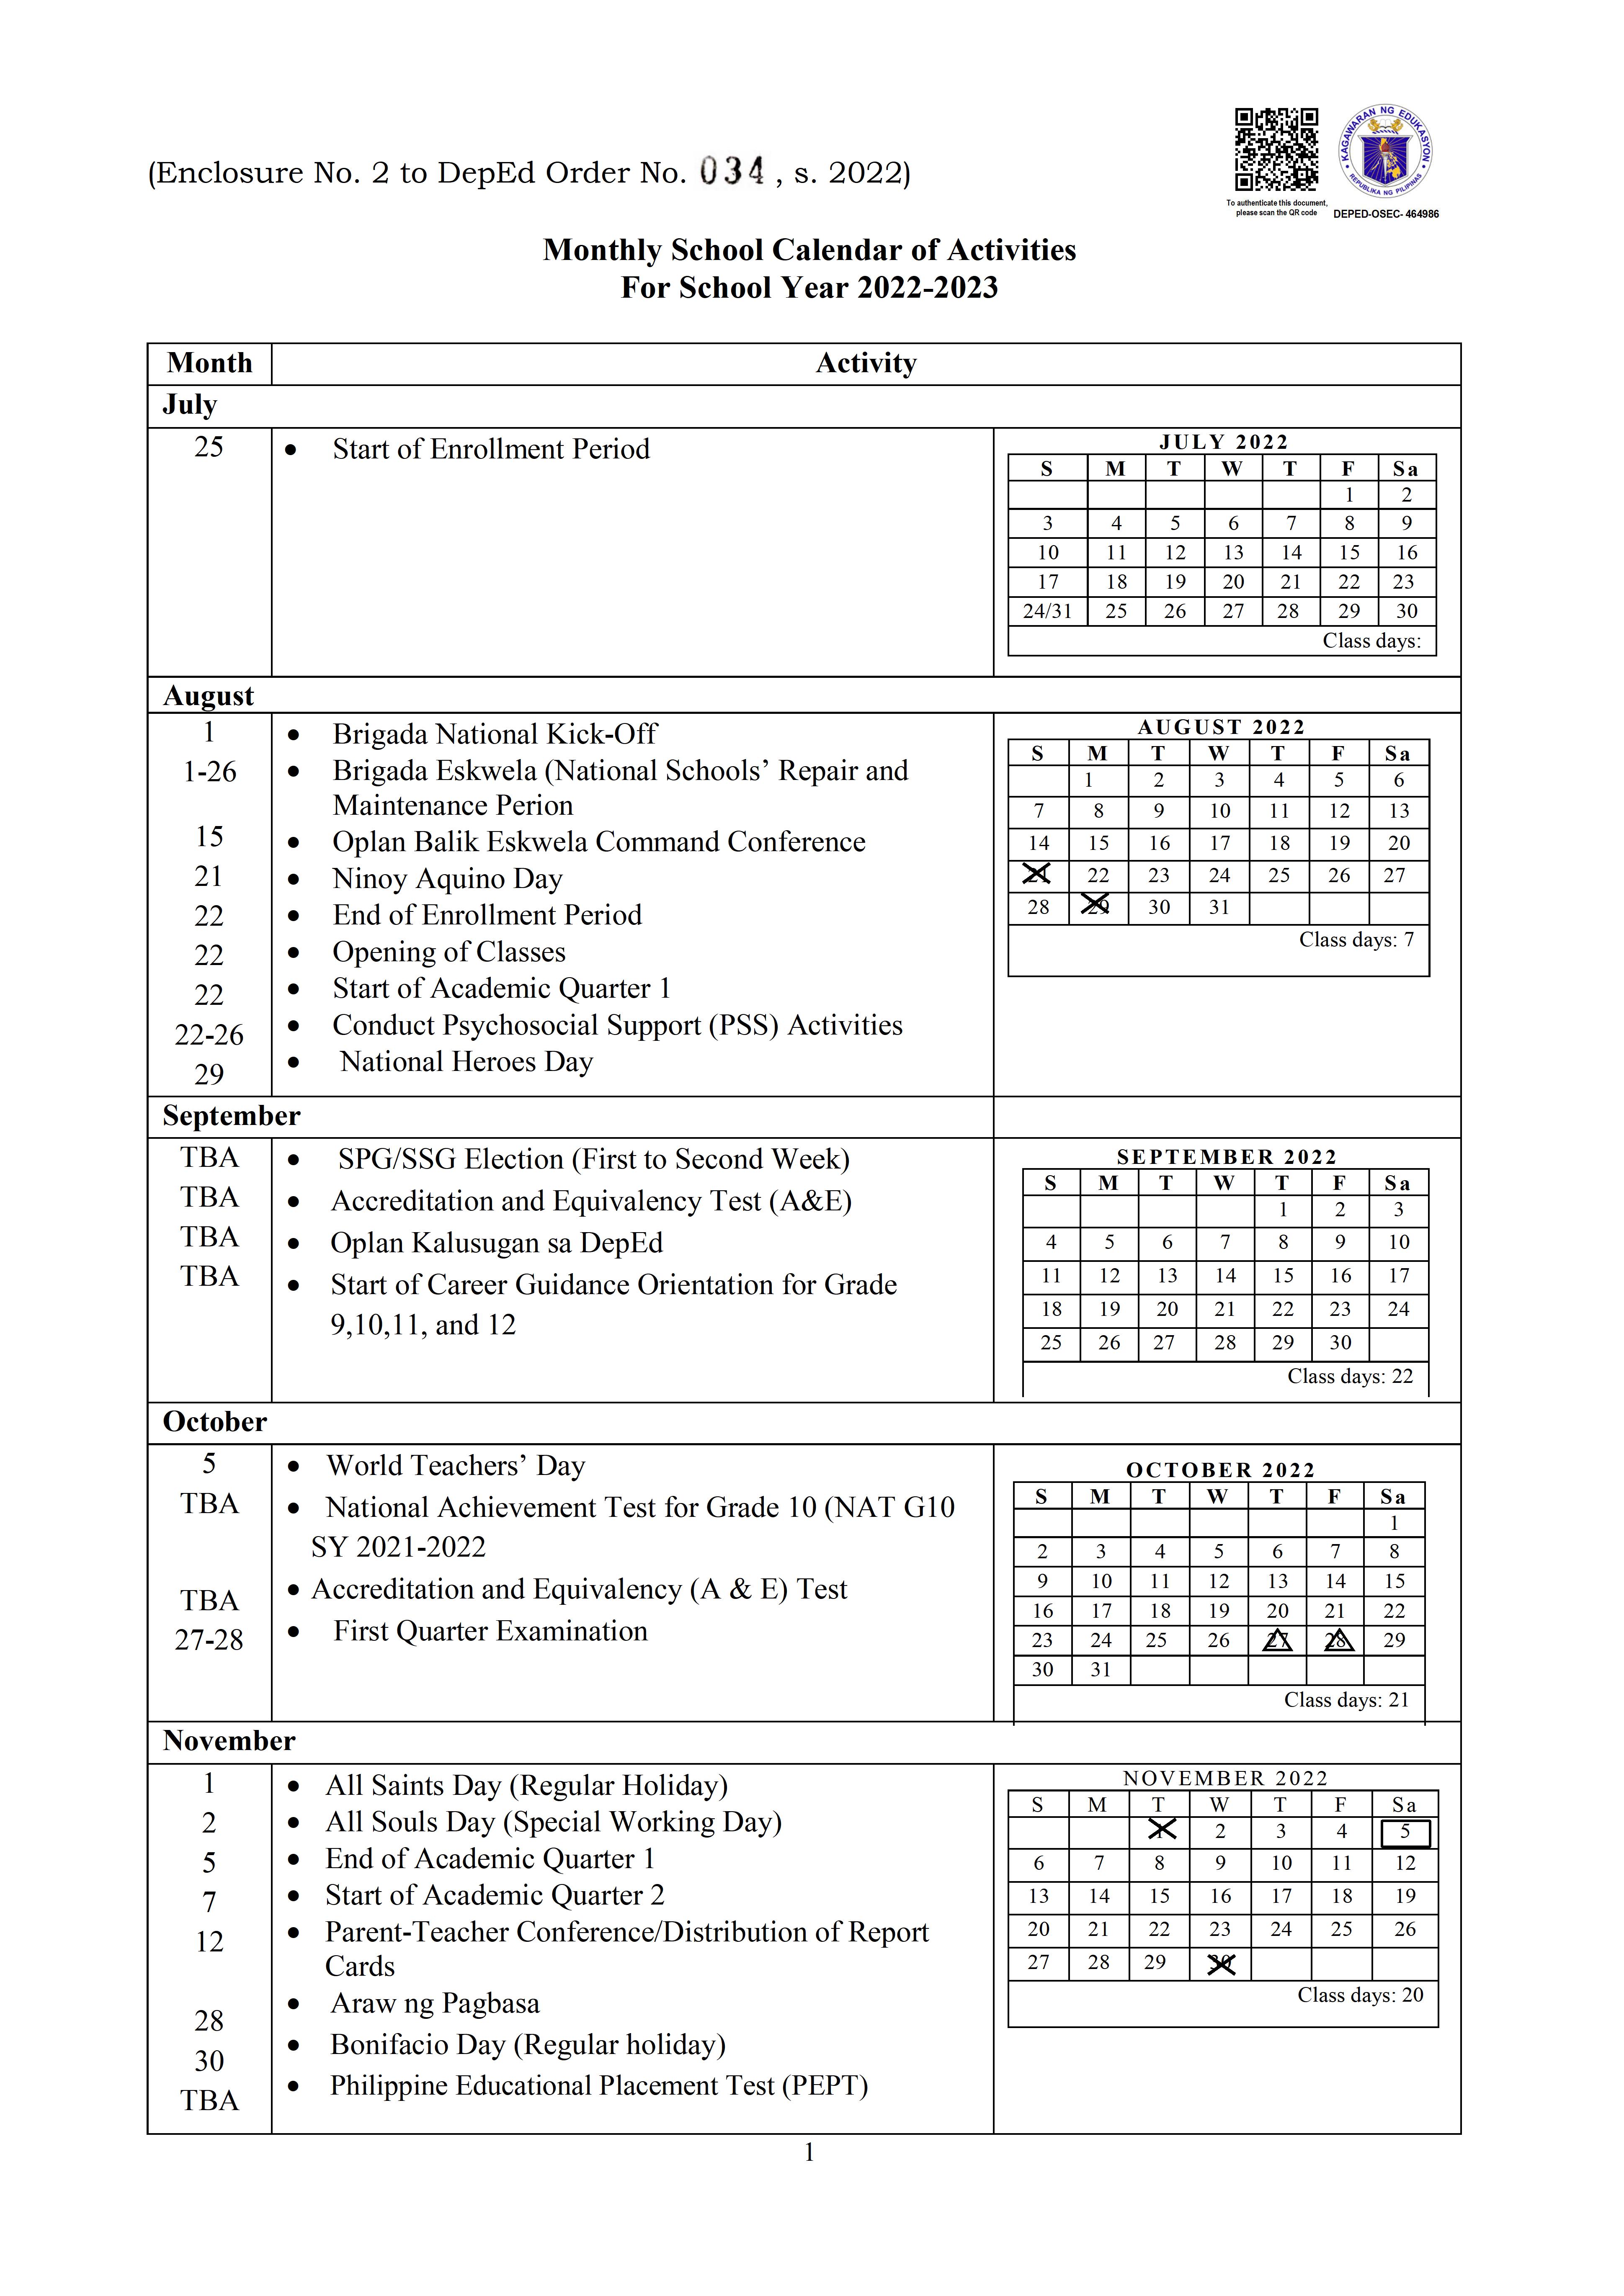 Deped S Proposed School Calendar For School Year 2022 vrogue.co